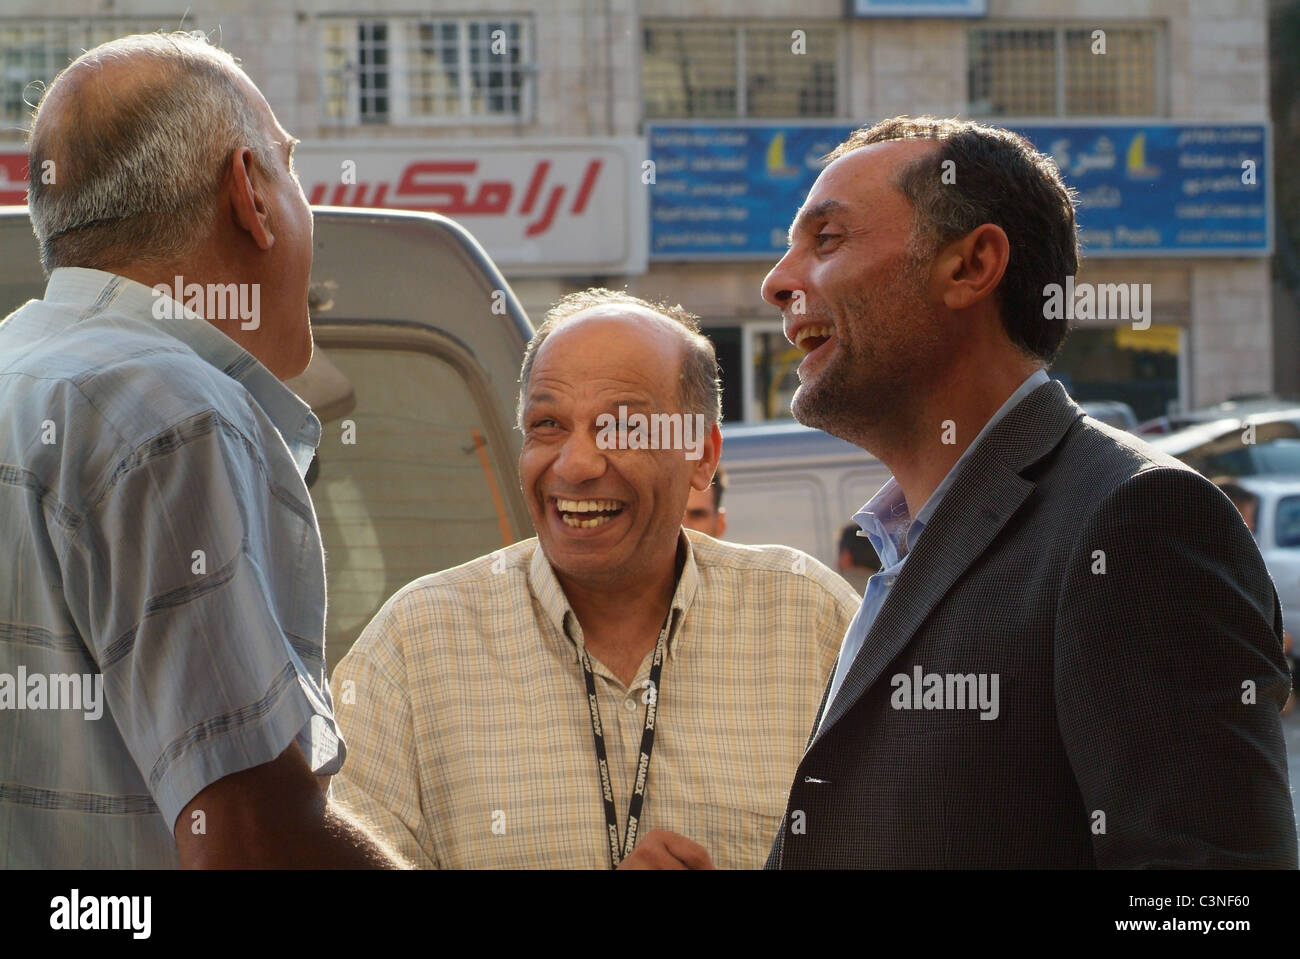 Fadi Ghandour, founder and CEO of ARAMEX, checking up on activity at one of his Amman sorting facilities. Stock Photo